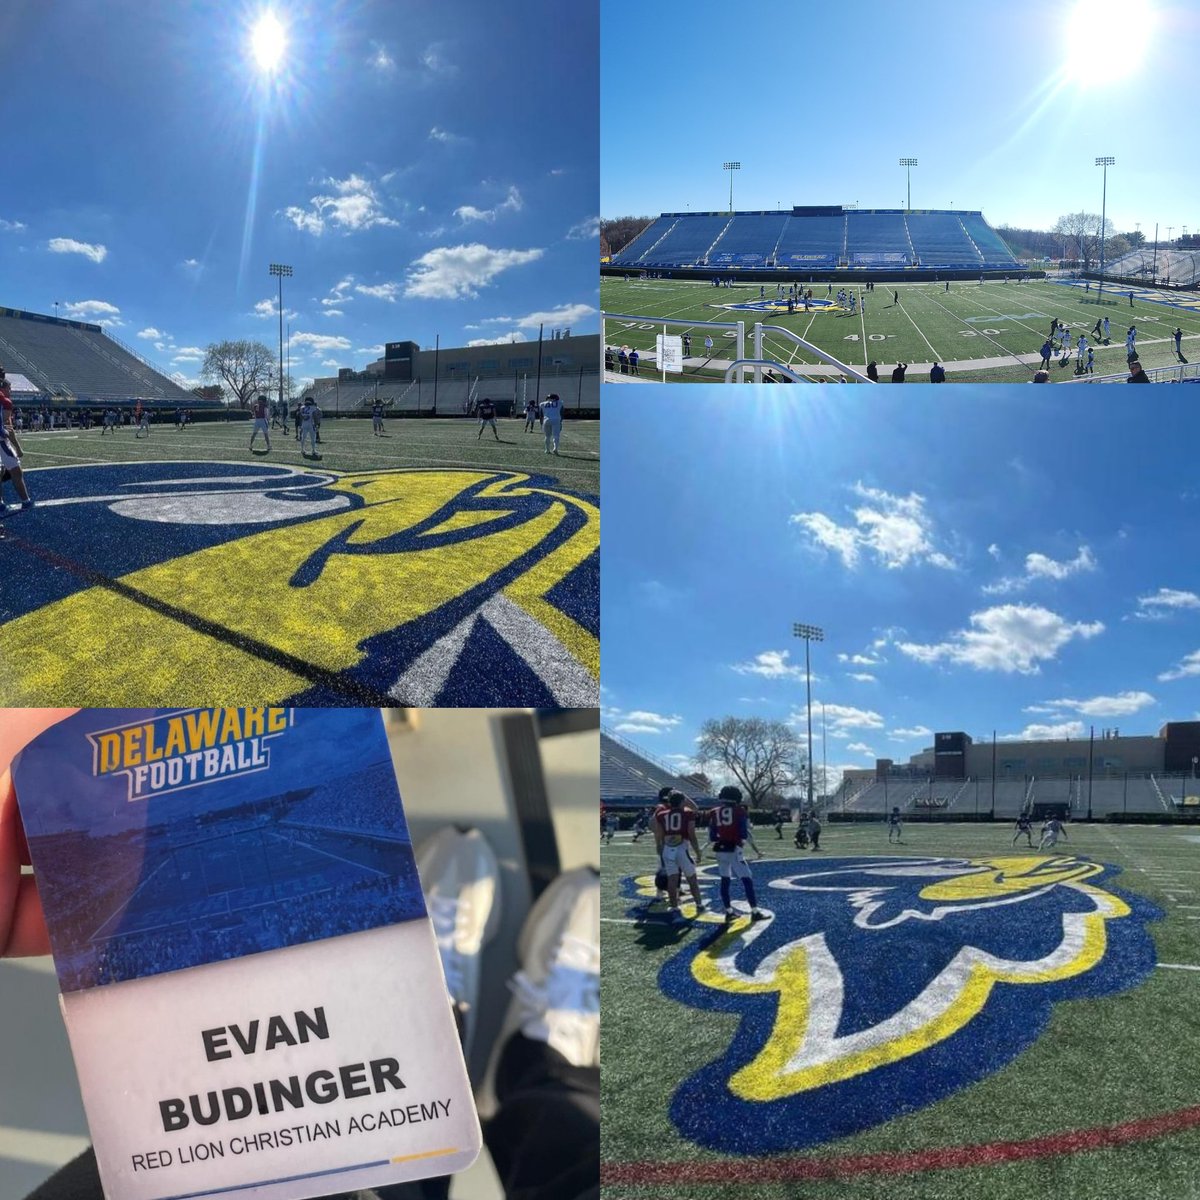 It was perfect weather today for football at @Delaware_FB spring practice. Thank you @ryancarty10 and @CoachGoldrich for the invitation. It was a great experience, and I'm looking forward to camp!